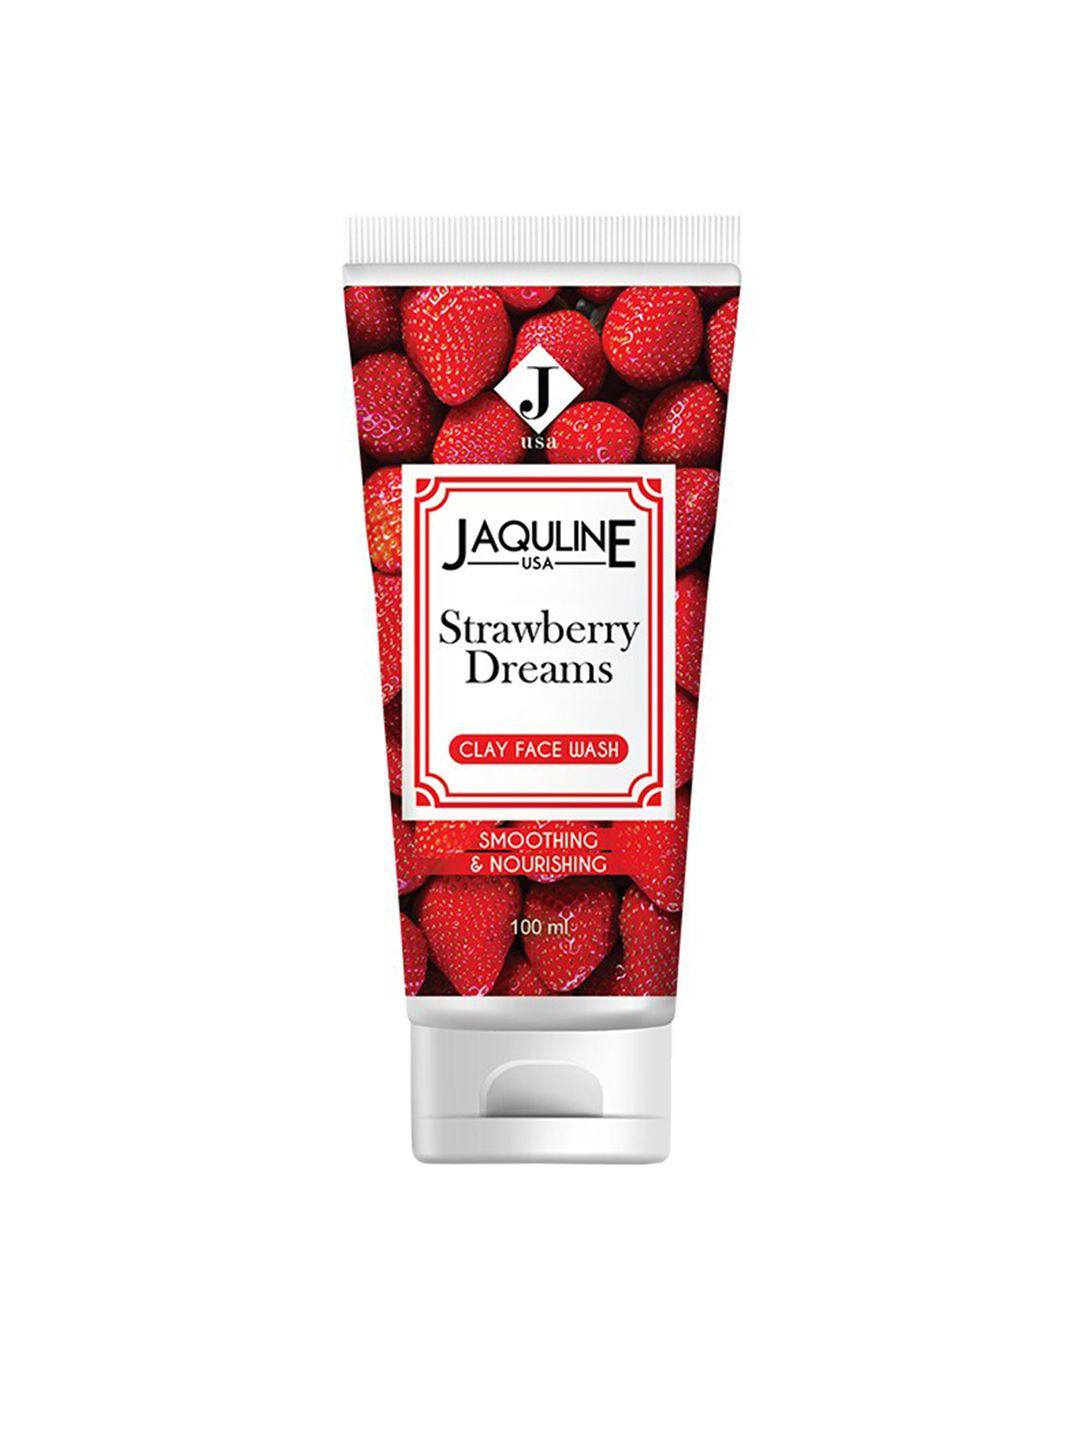 jaquline usa strawberry dreams clay face wash - 100 ml